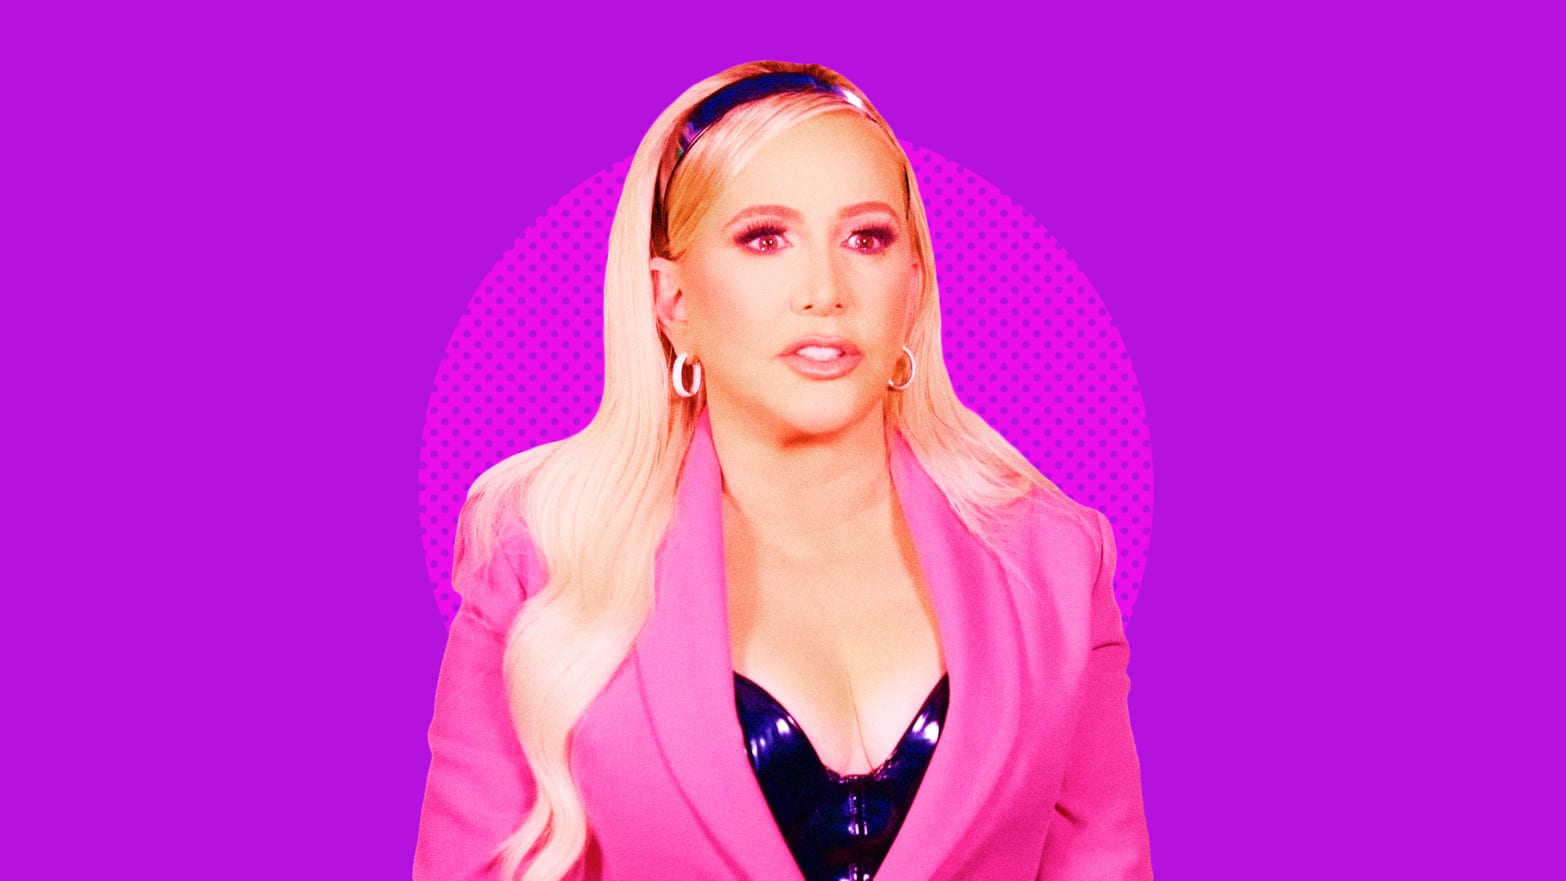 A photo illustration of Shannon Beador on a purple background.